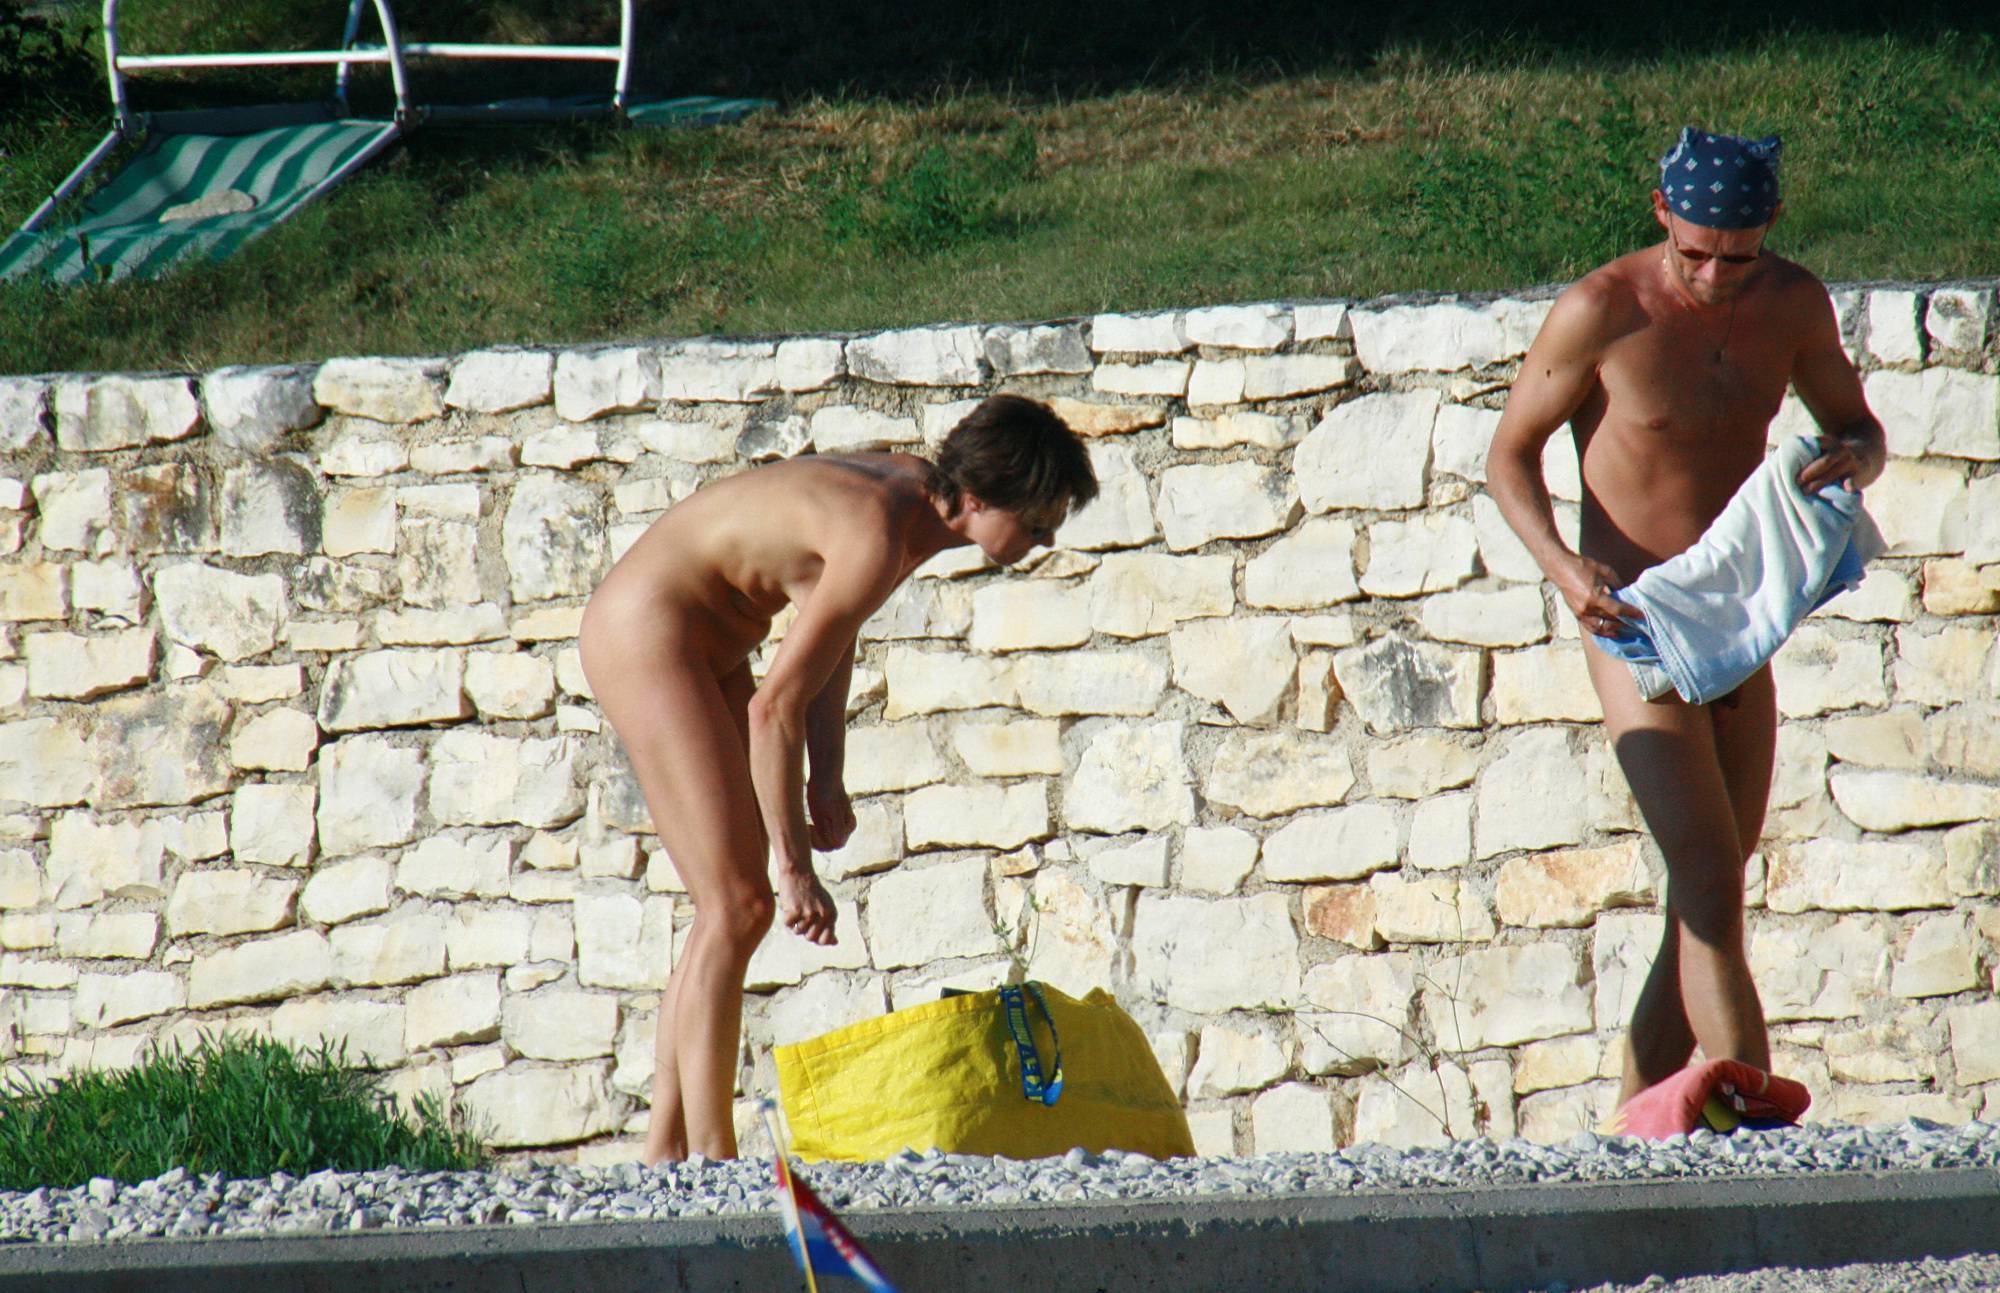 Nudist Pictures Gather Your Beach Towels - 2